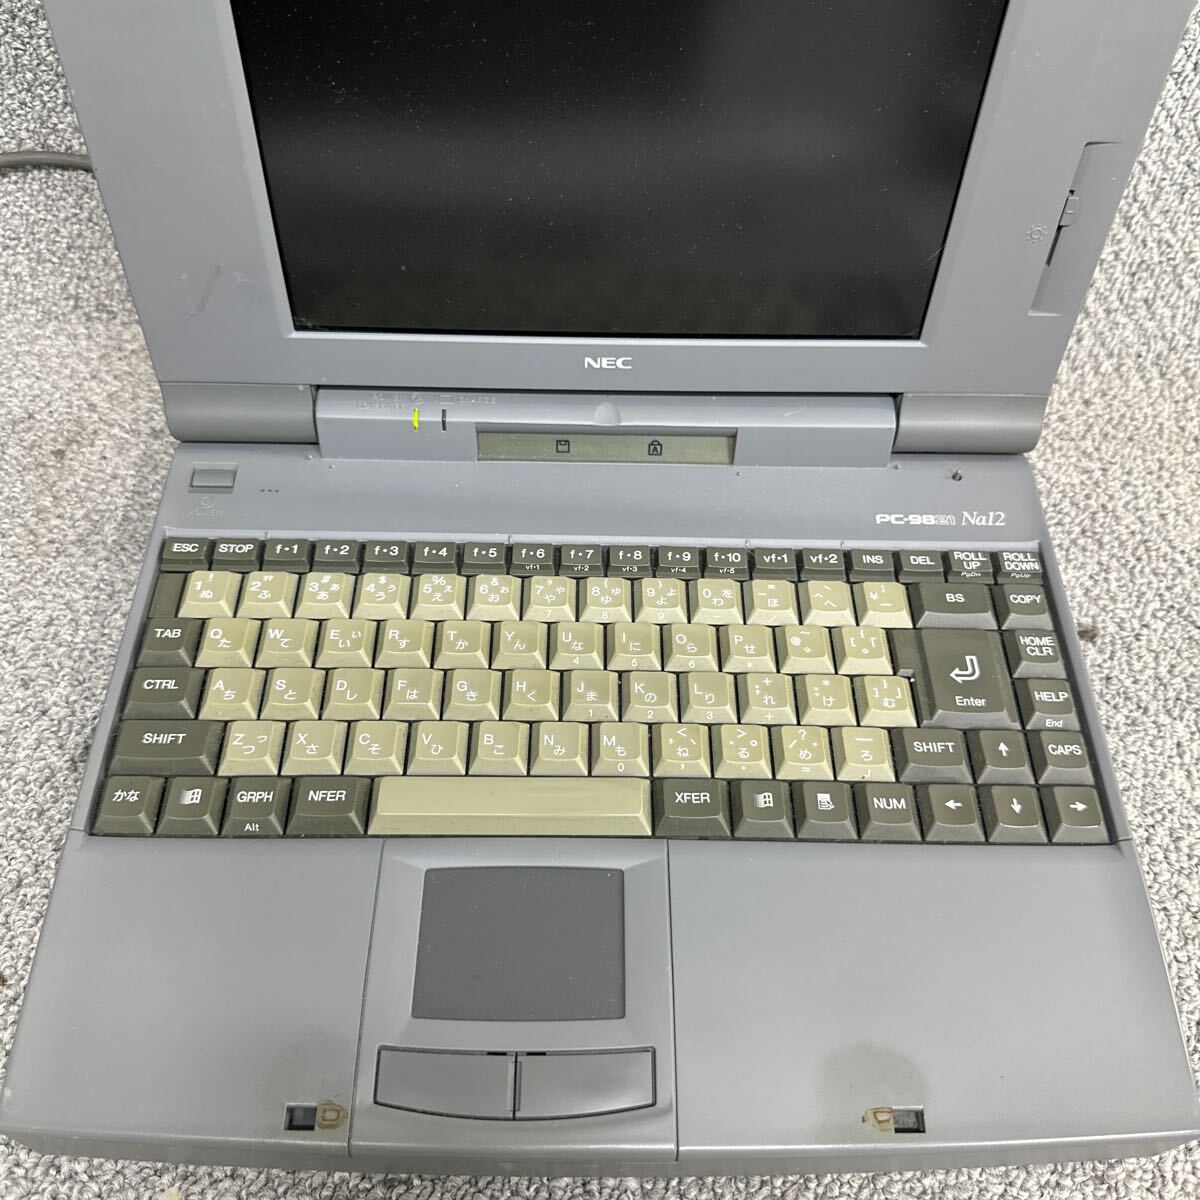 PCN98-1814 super-discount PC98 notebook NEC 98note PC-9821Na12/H10 start-up has confirmed Junk including in a package possibility 